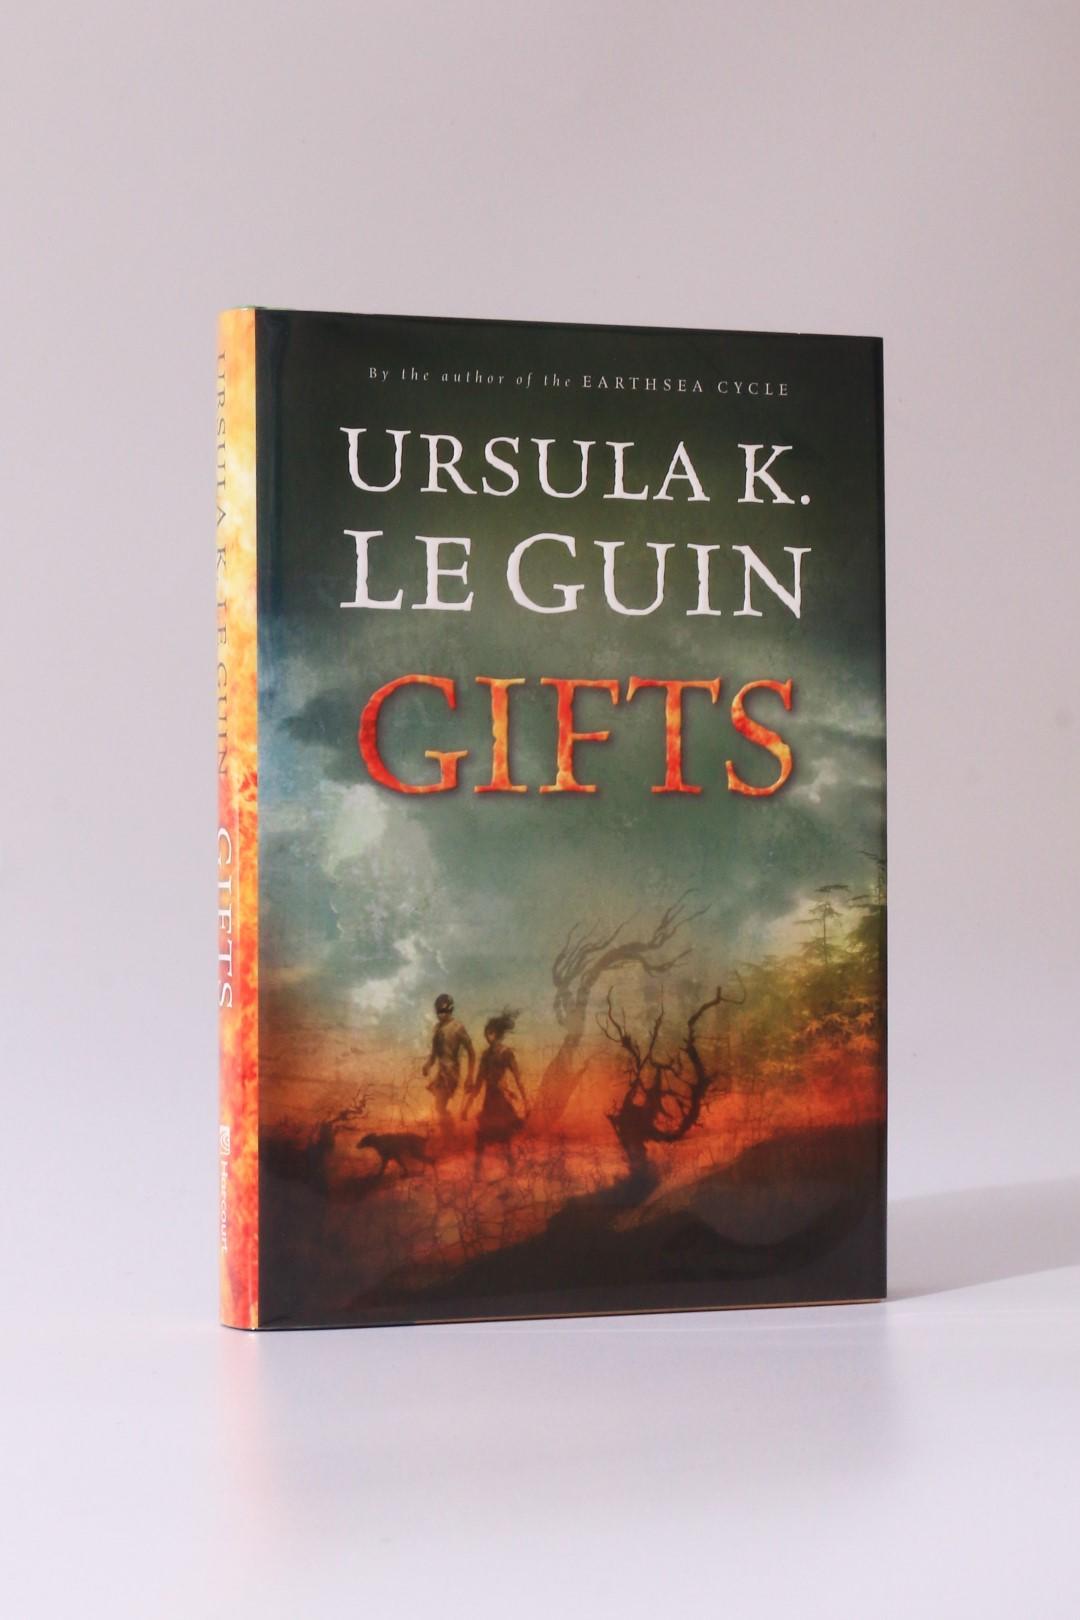 Ursula K. Le Guin - Gifts - Harcourt, 2004, Signed First Edition.